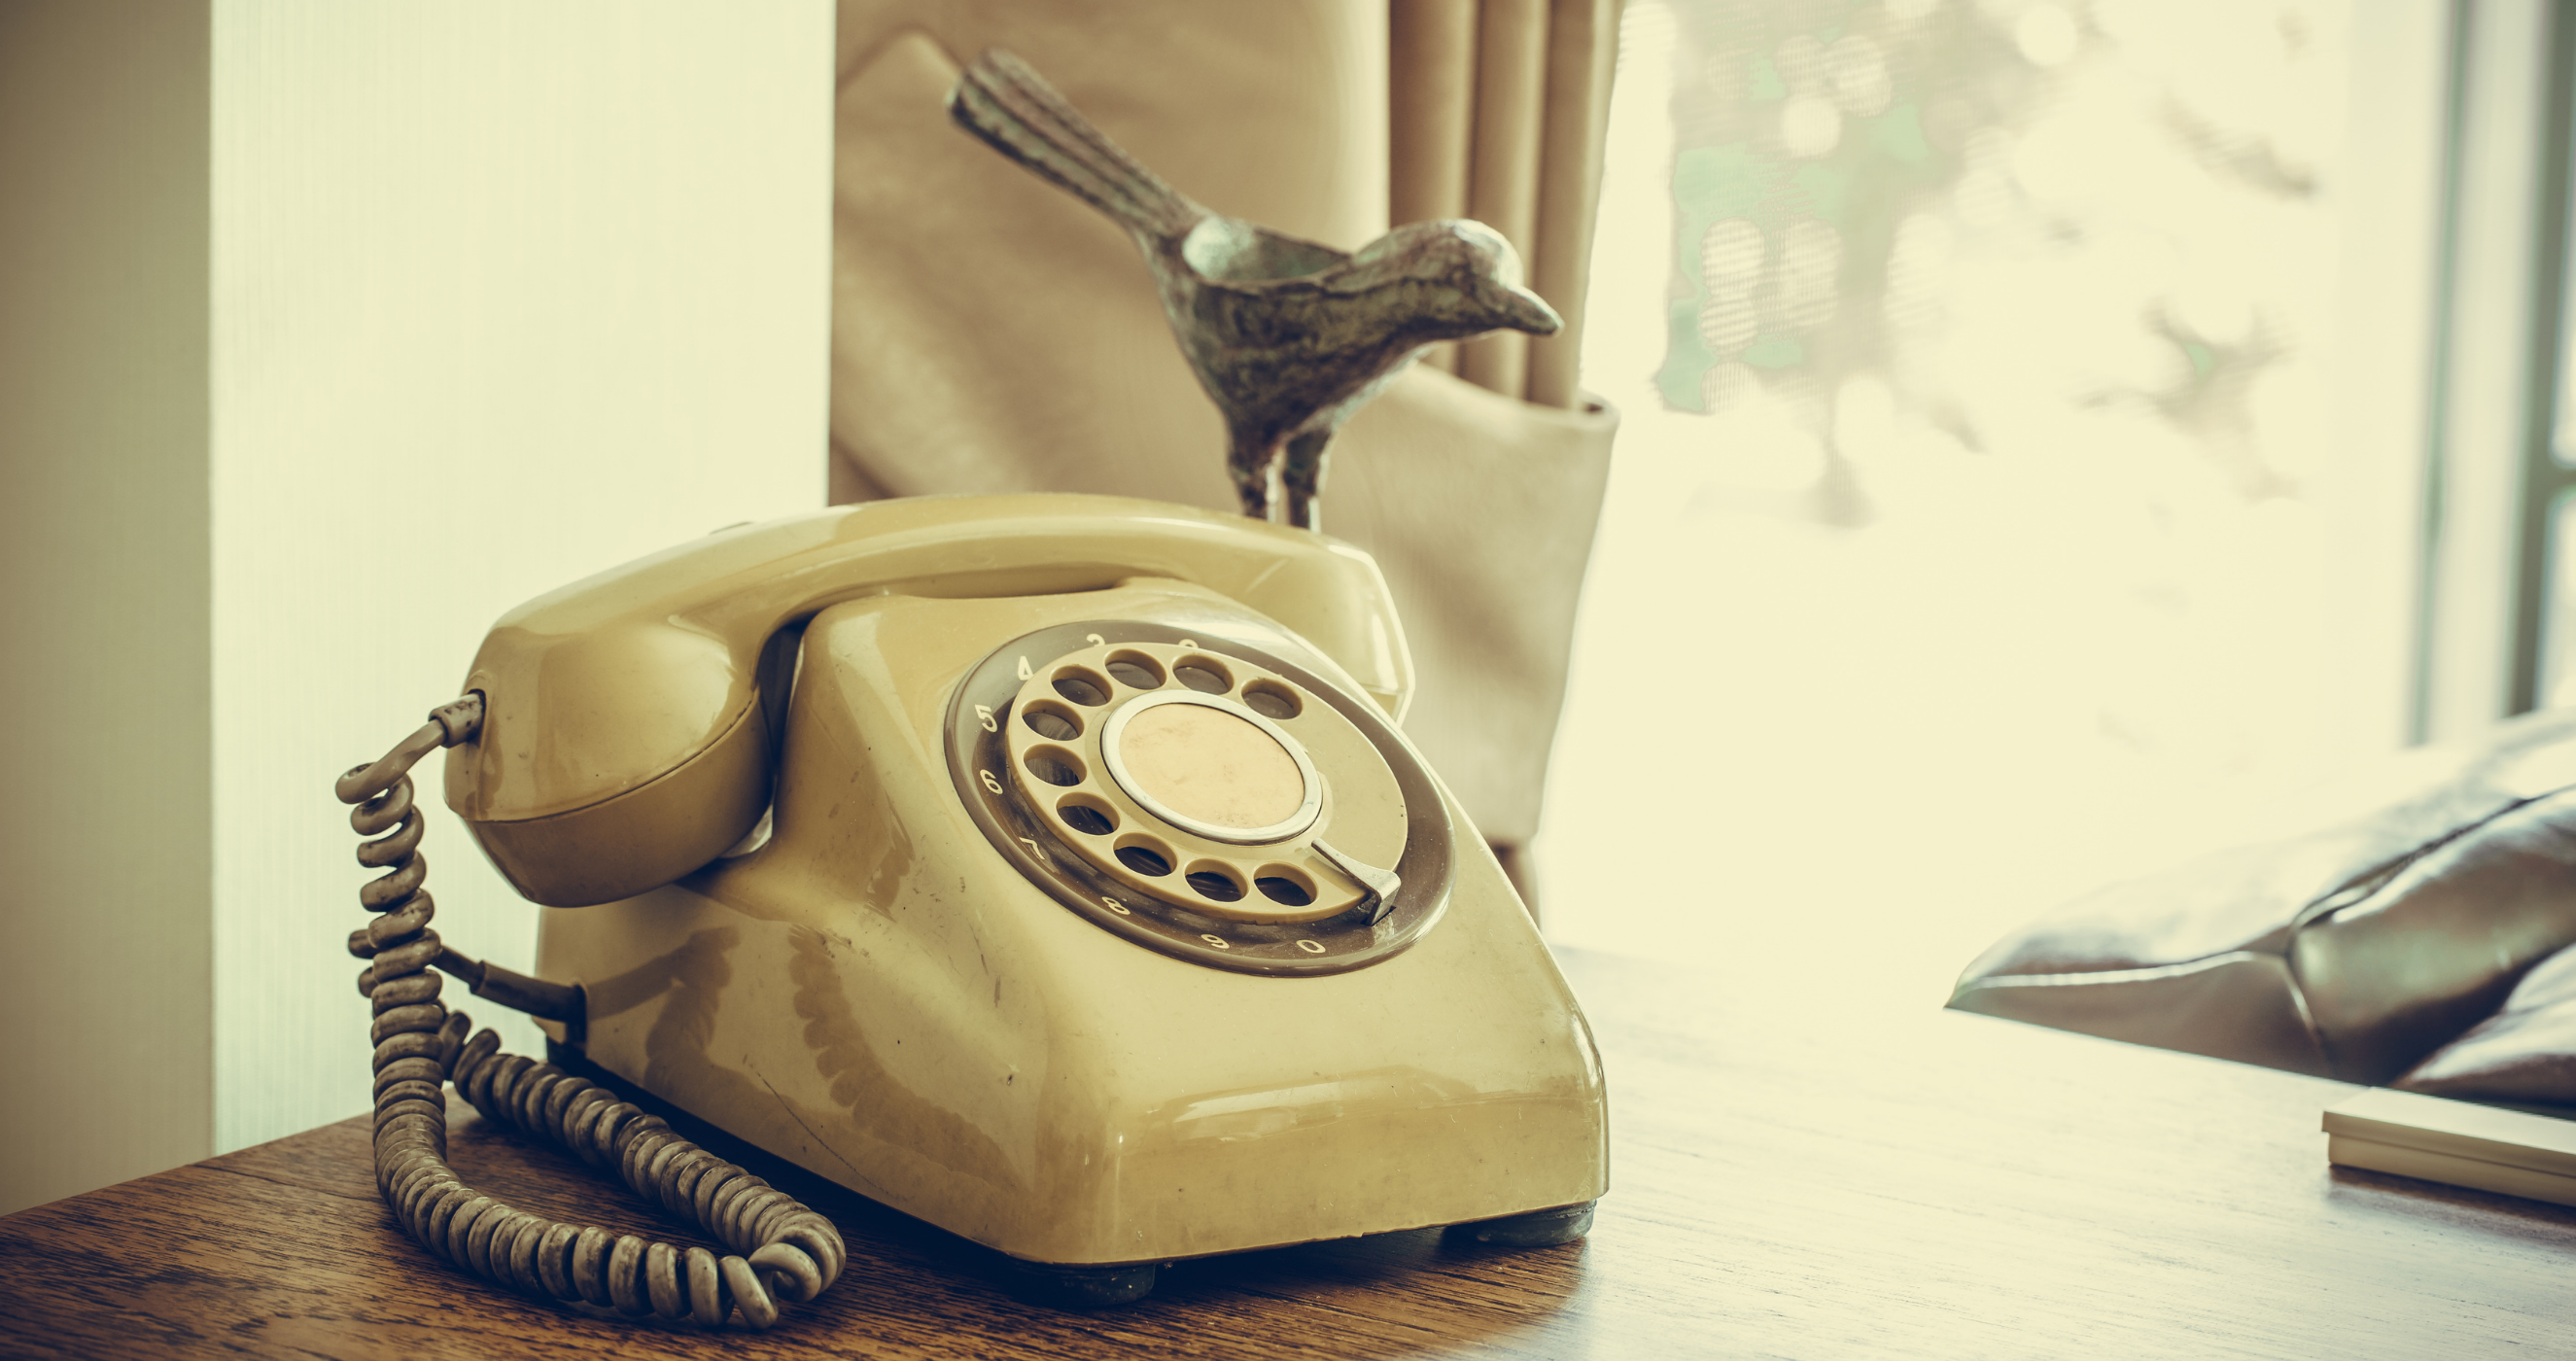 Photo of old rotary phone on a table in front of a window. A small metal bird figurine sits just behind the phone